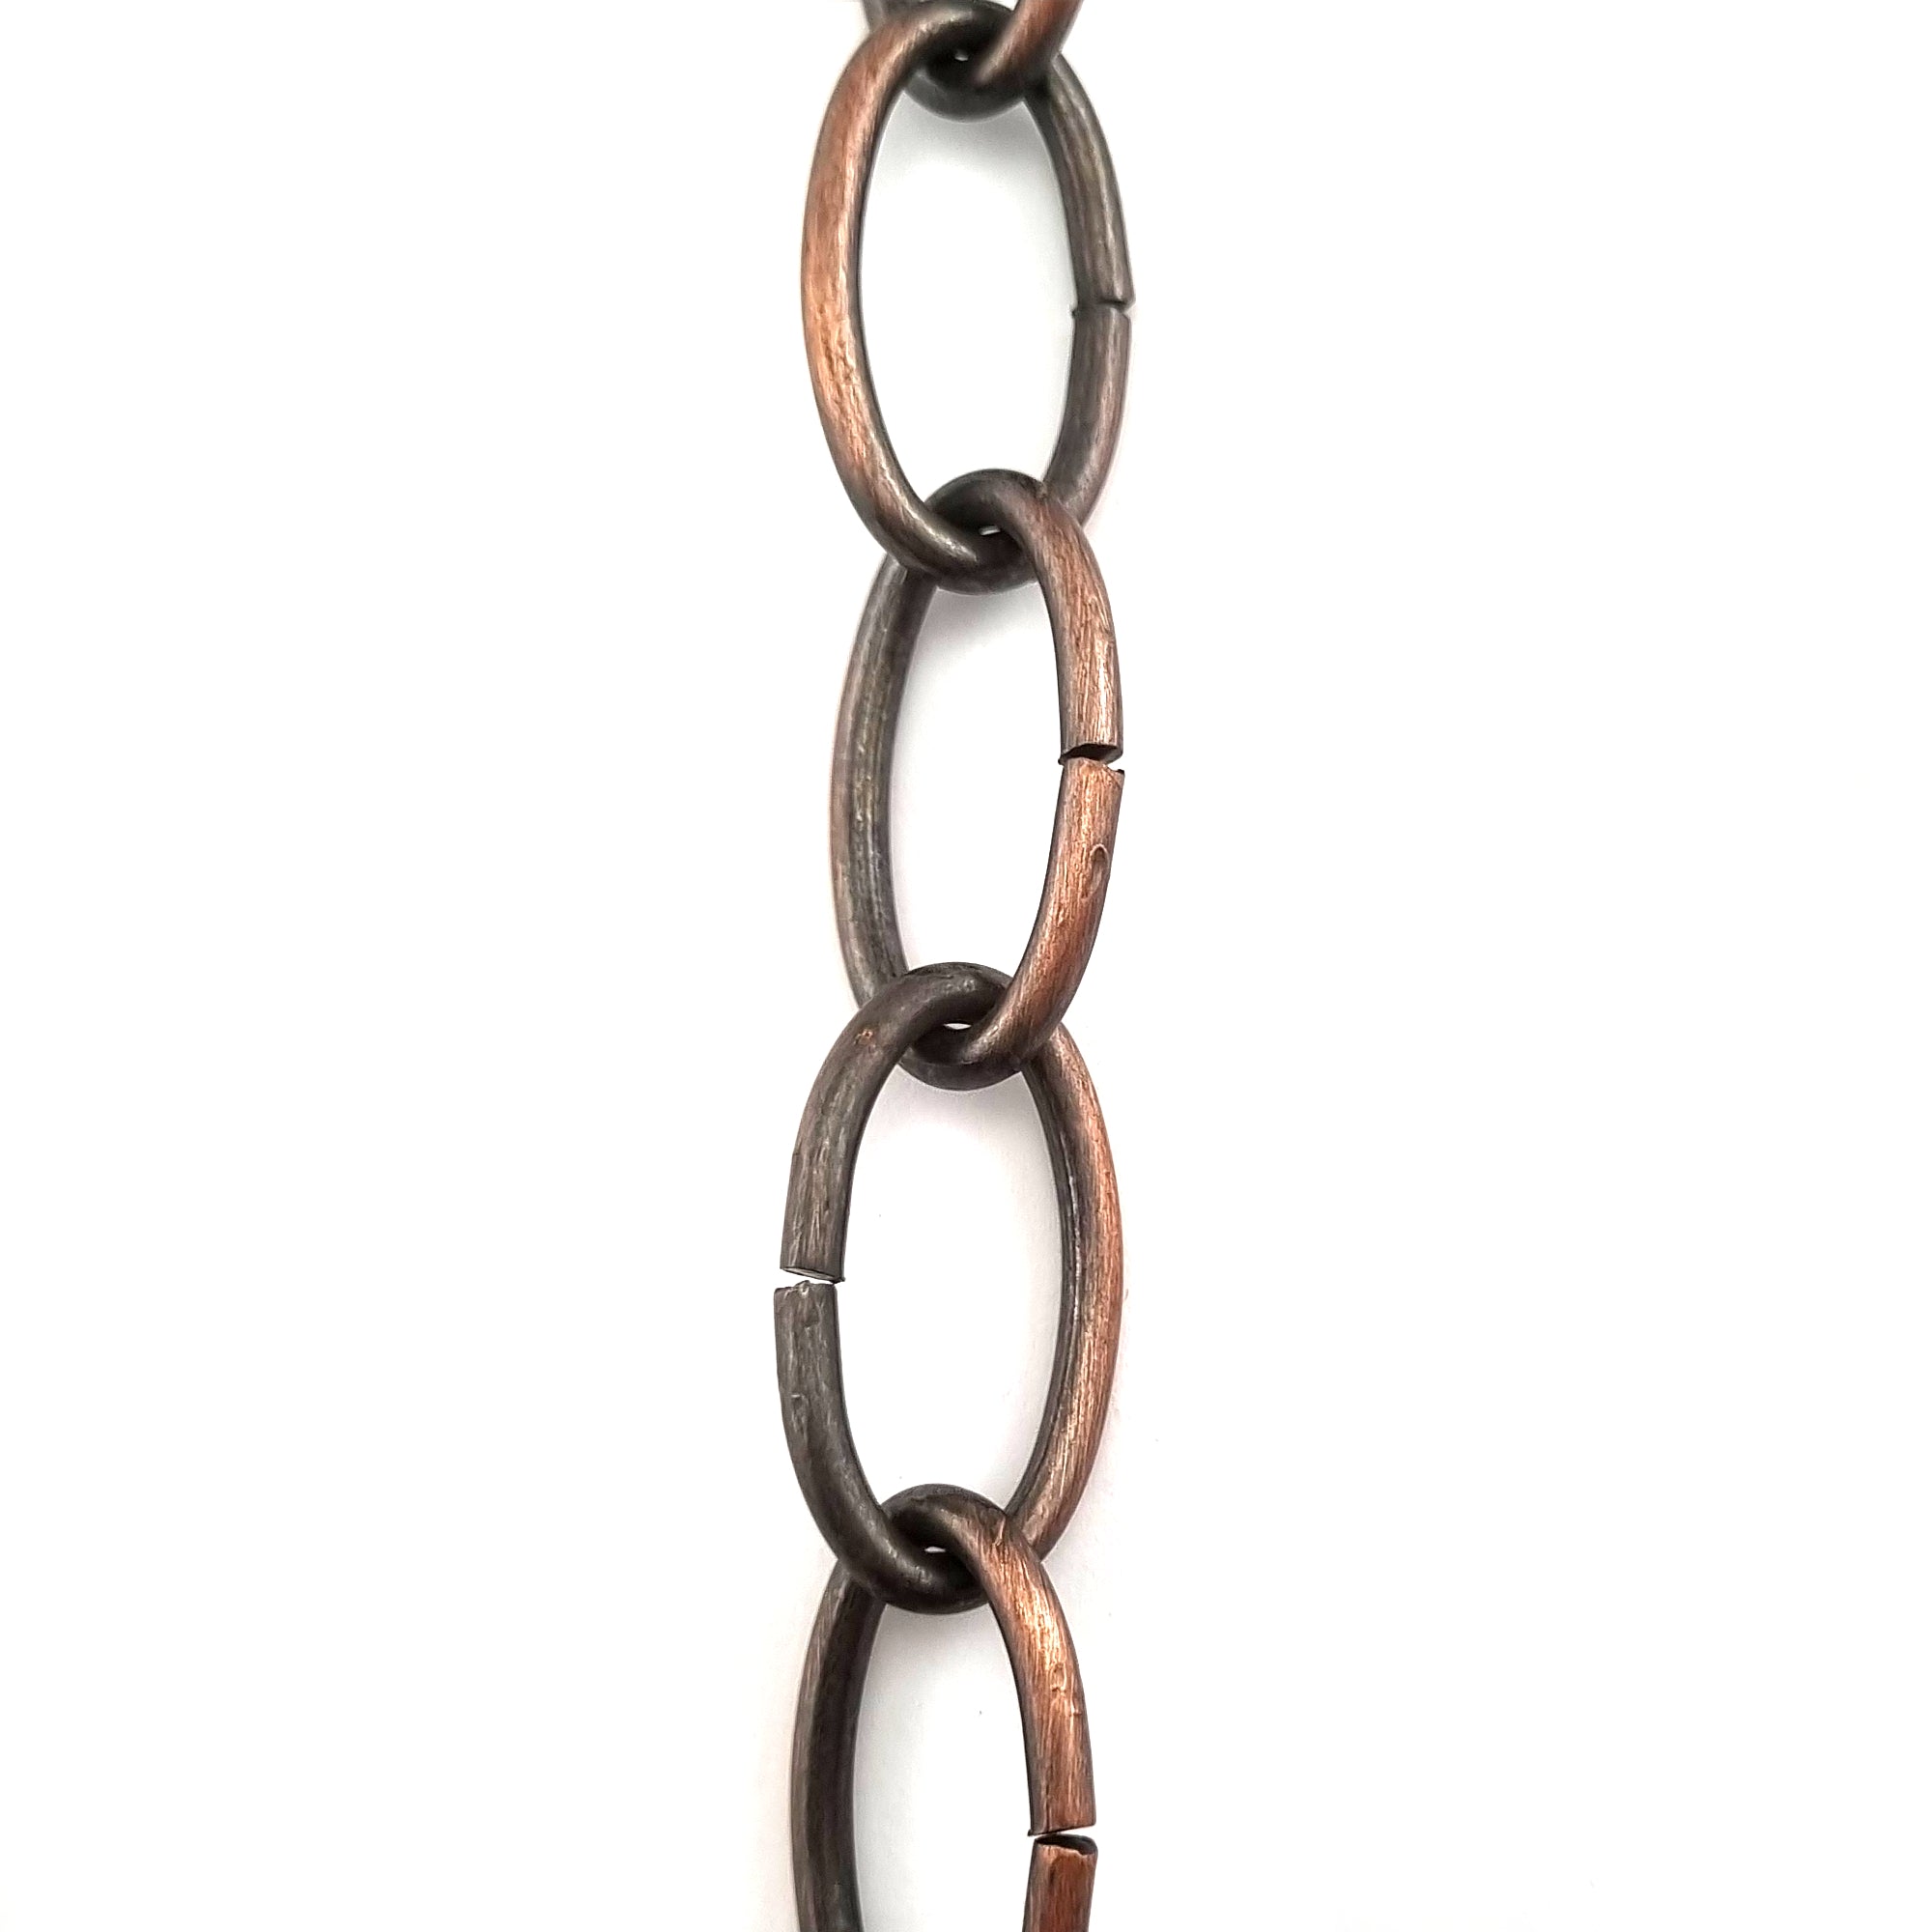 Lighting Chain in Antique Bronze, size 3.8mm. Order chain by the metre. Delivery Australia wide.